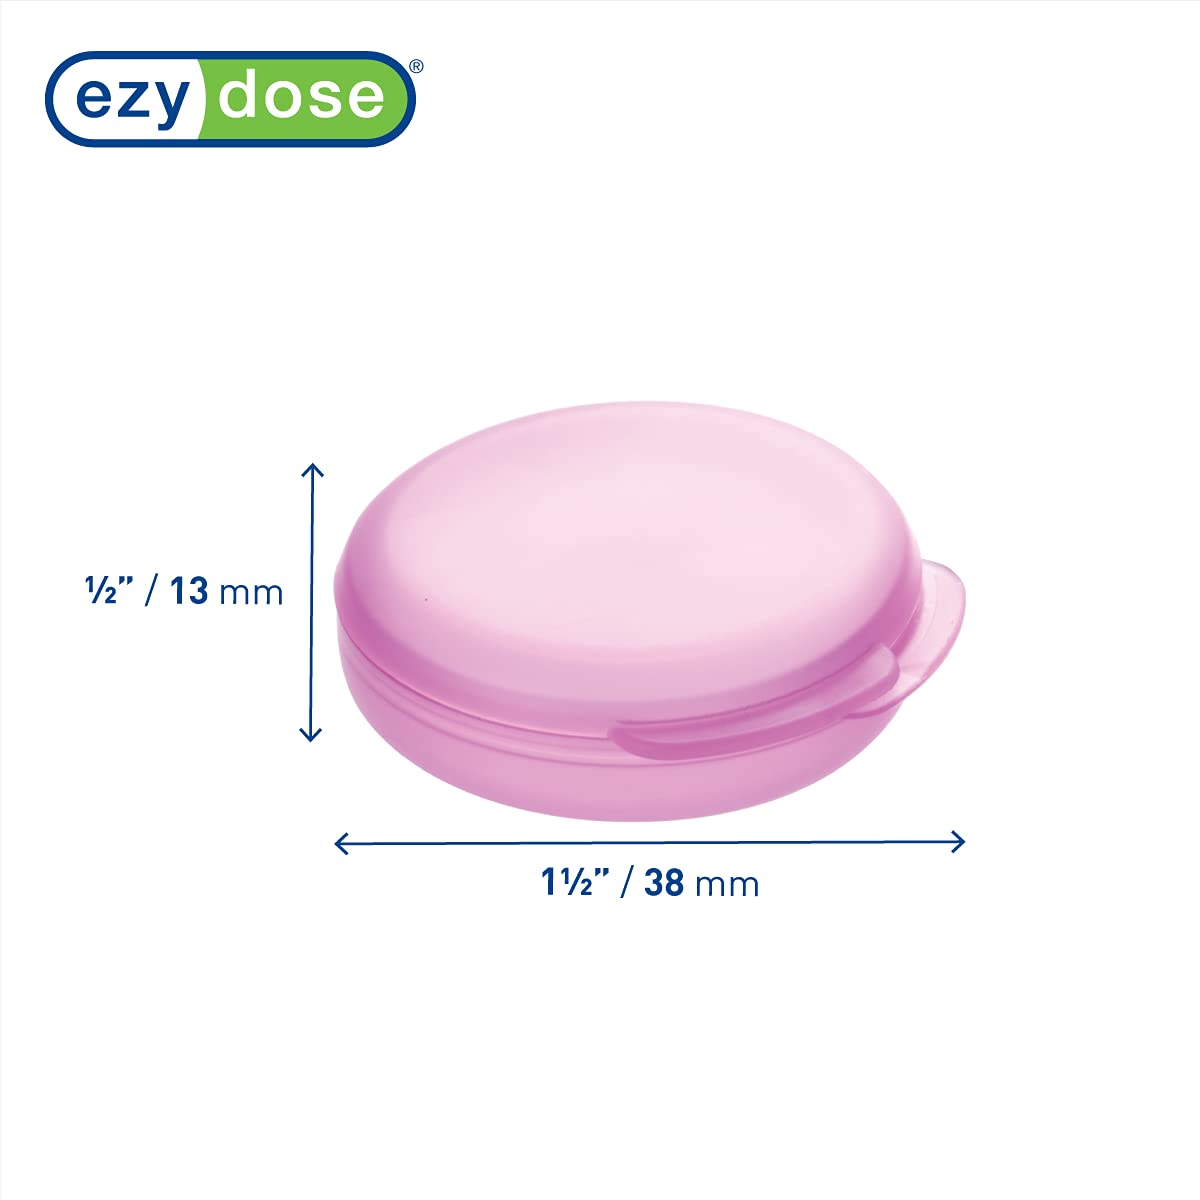 Ezy Dose Daily Round, Portable On-The-Go, Pill Box, Organizer and Vitamin Containers, Snap Shut Lids, Perfect For Traveling, Colors May Vary, 2 Pack